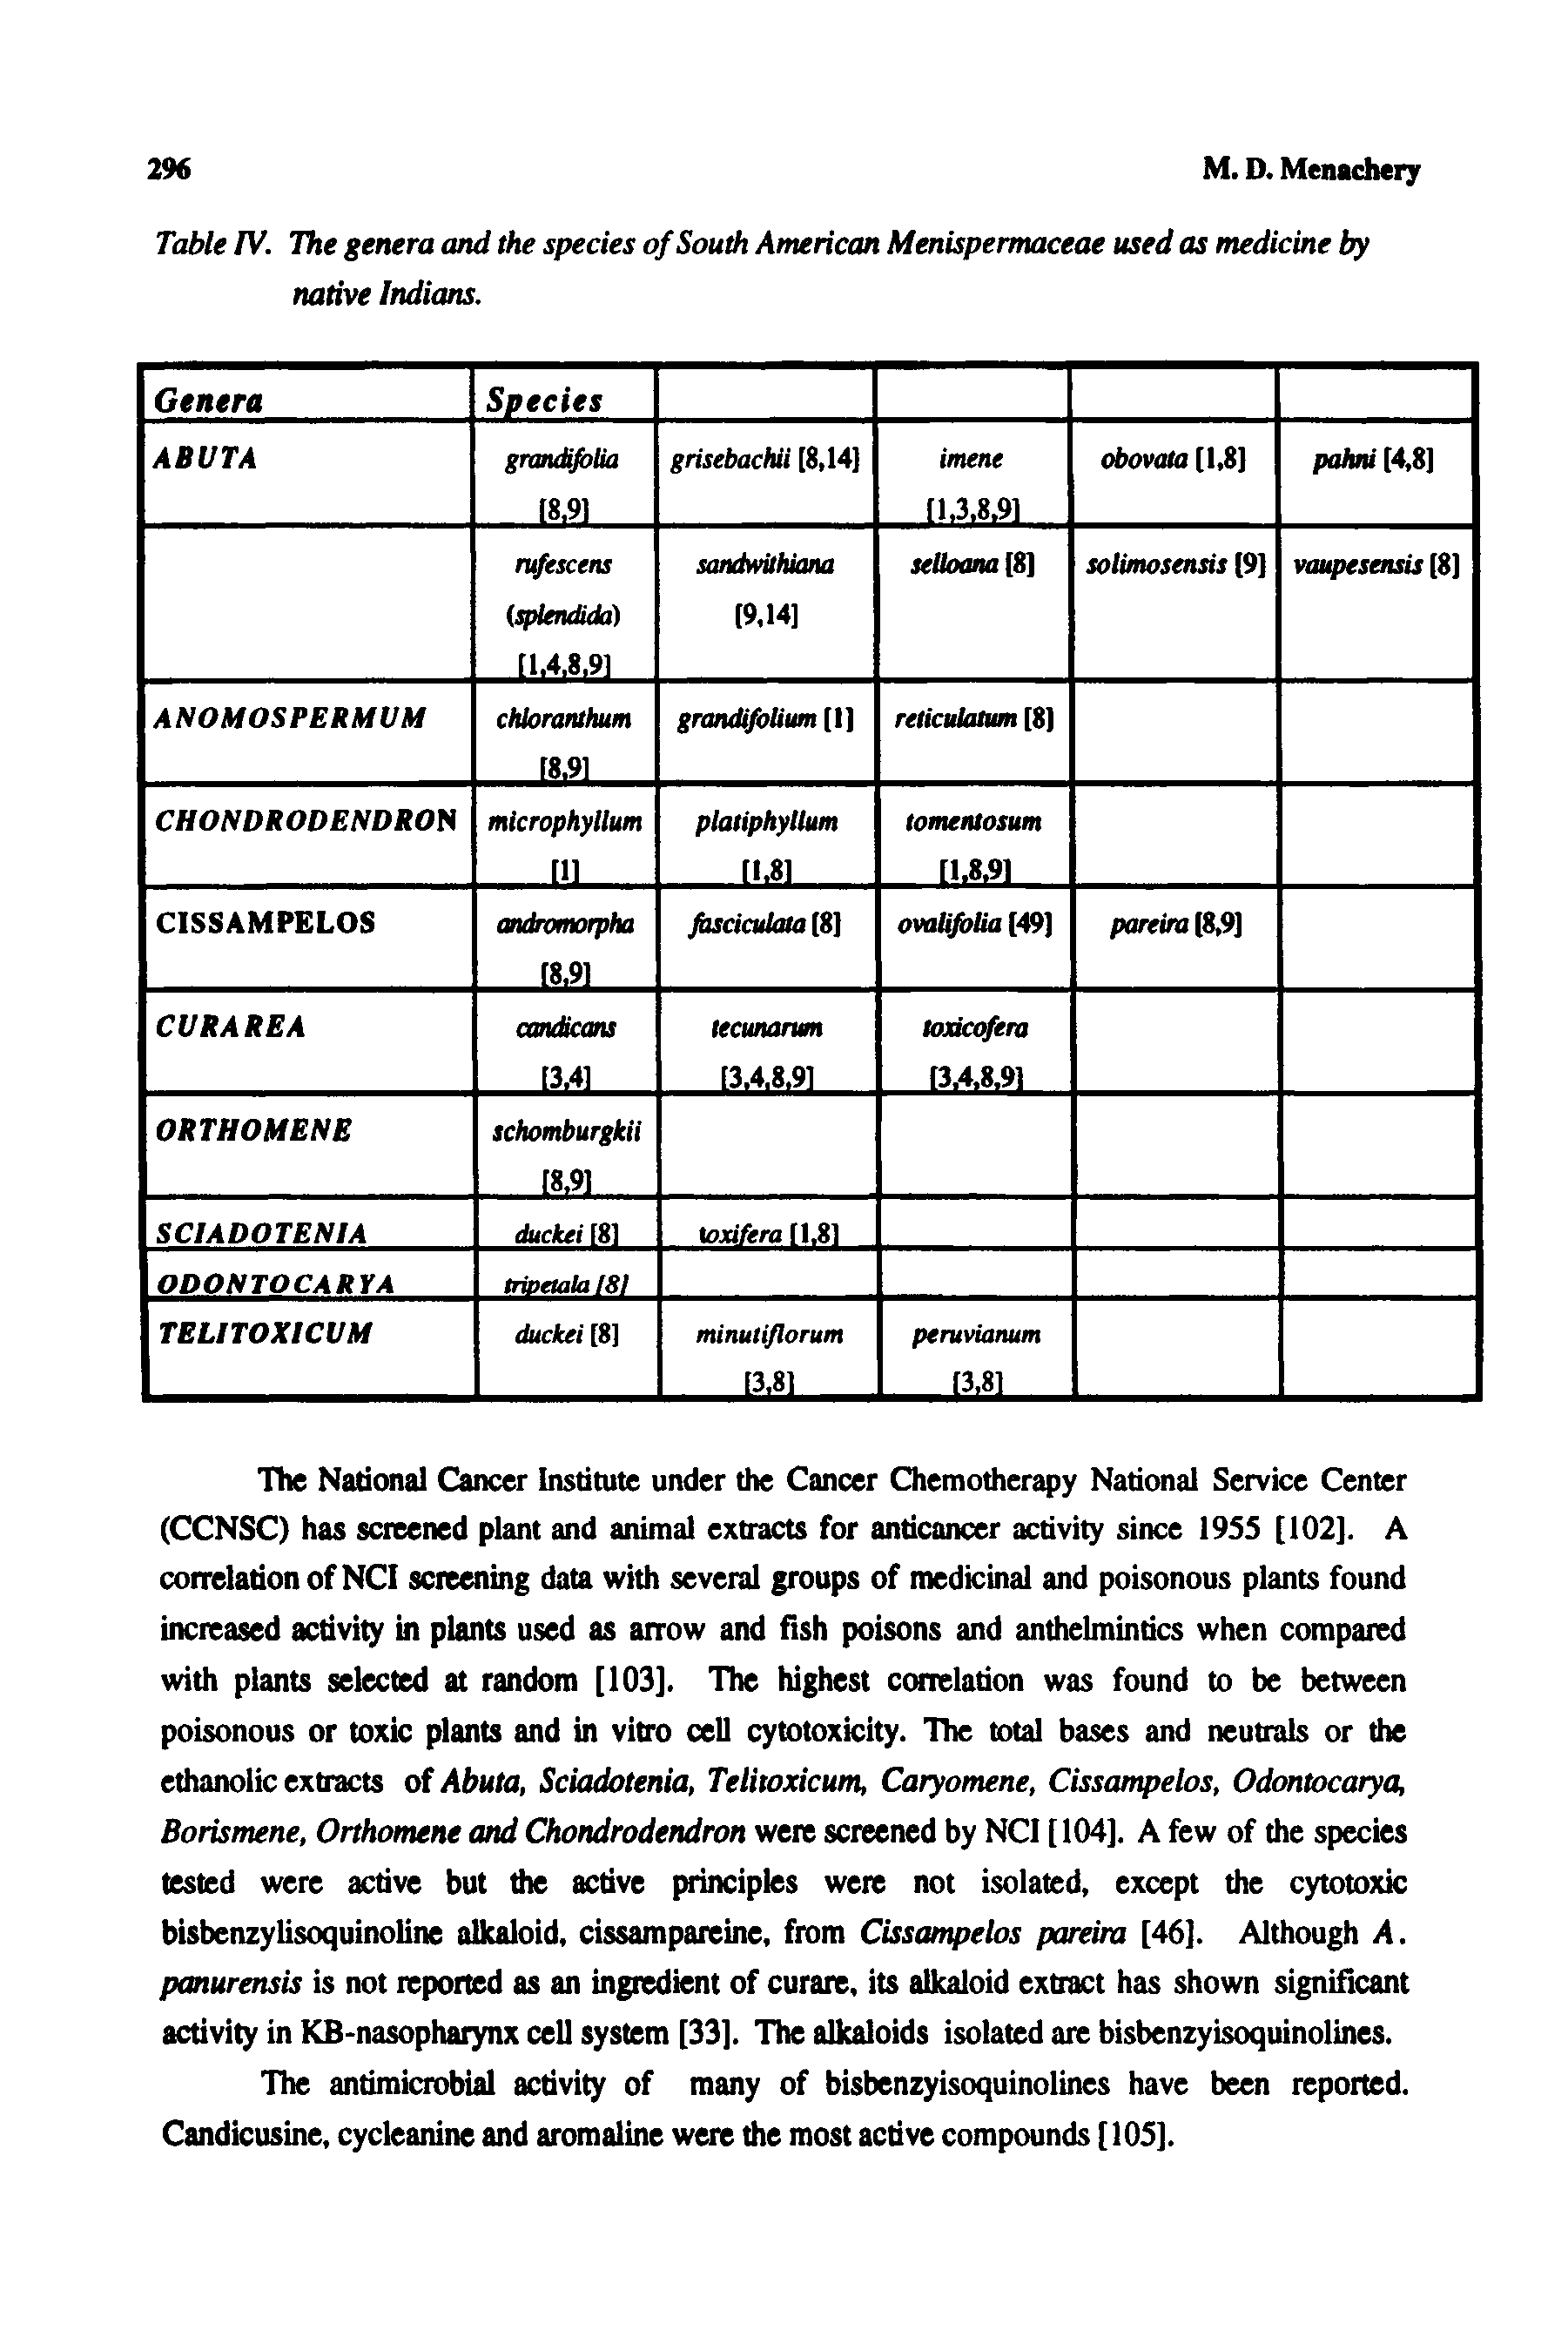 Table IV. The genera and the species of South American Menispermaceae used as medicine by native Indians.